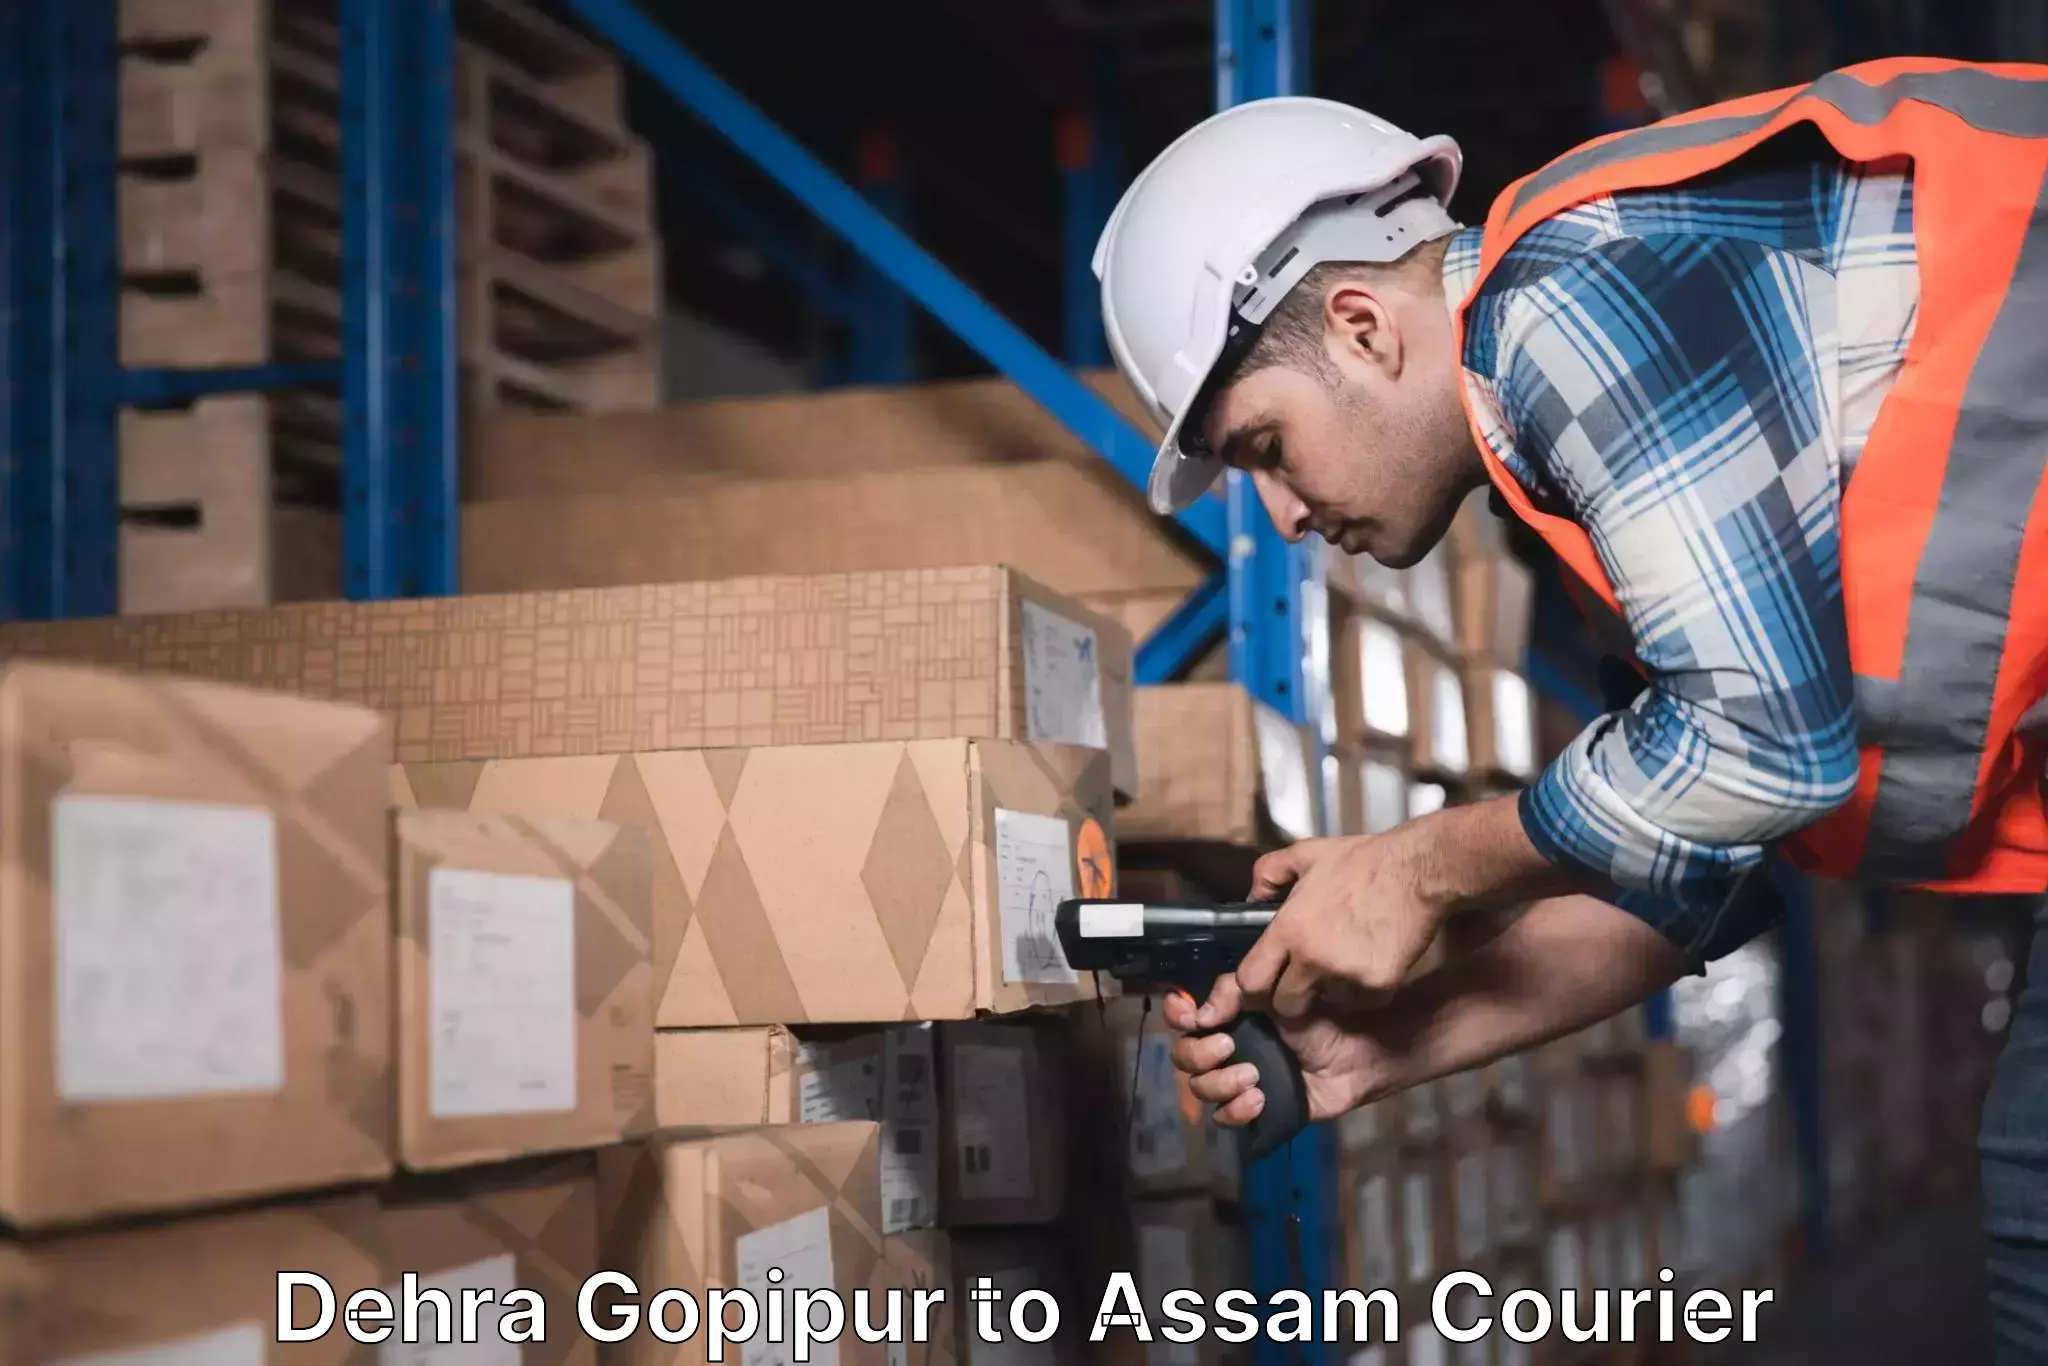 Local delivery service Dehra Gopipur to Assam